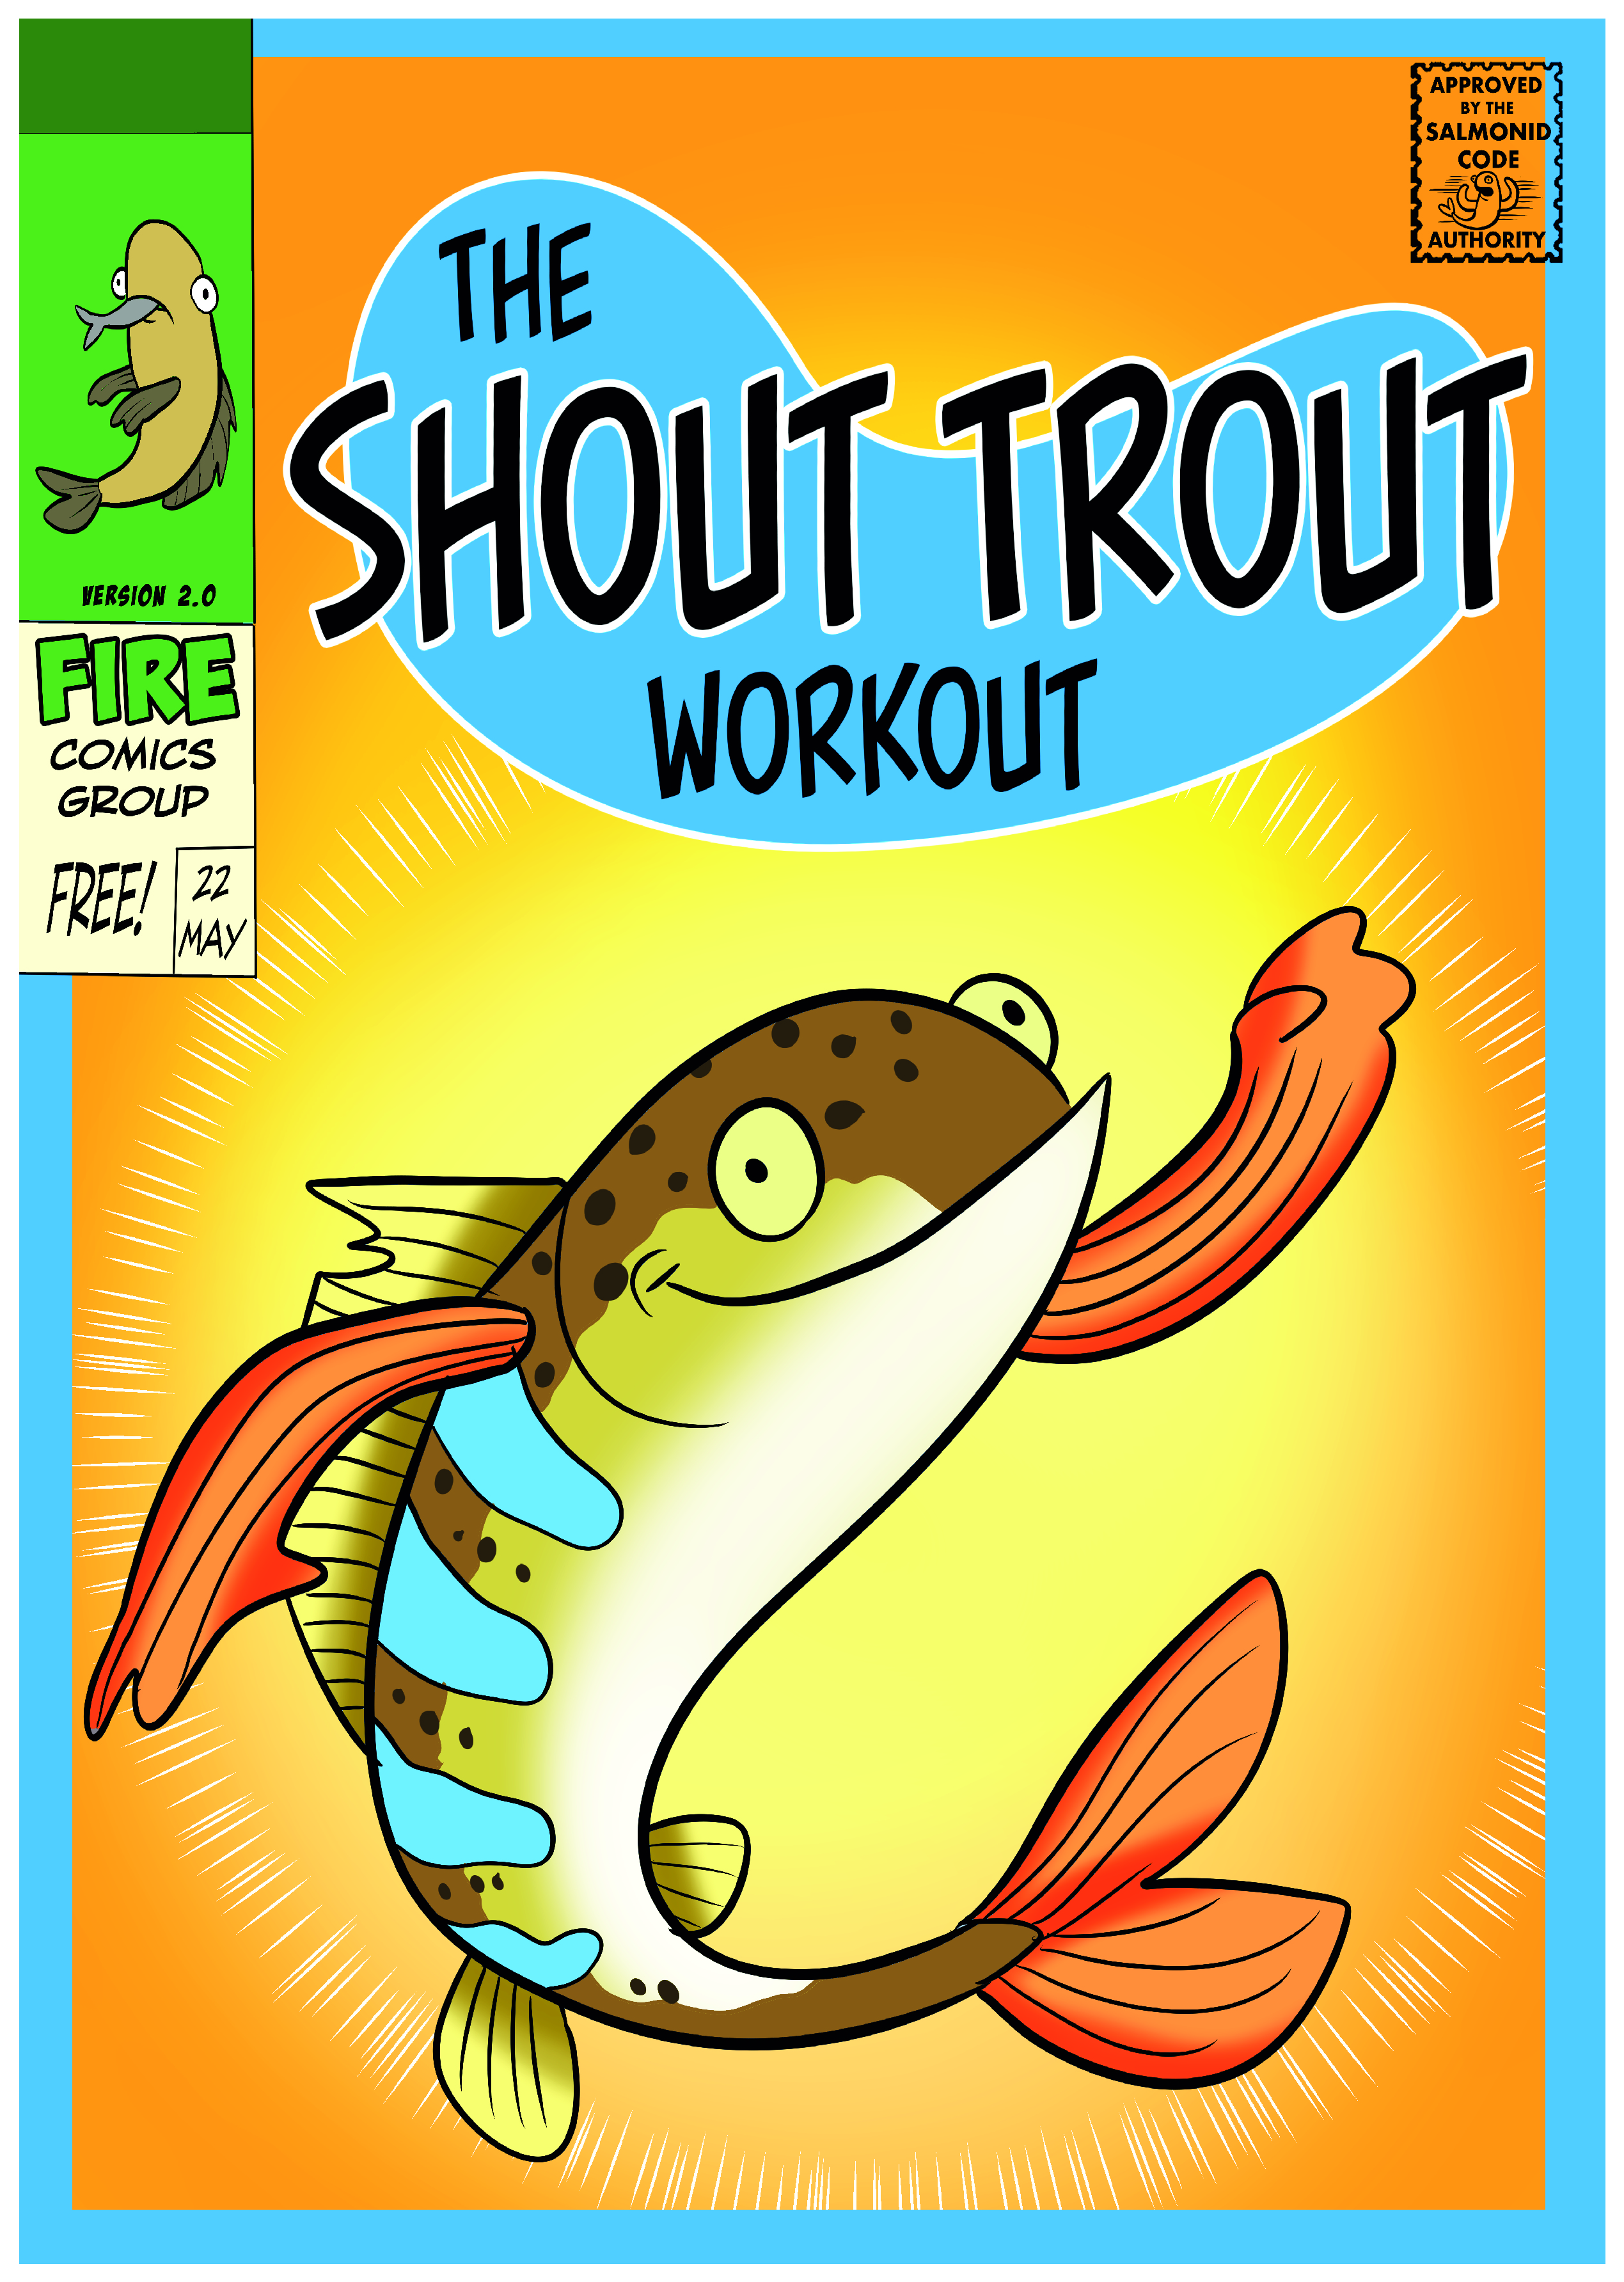 How Trout Workout